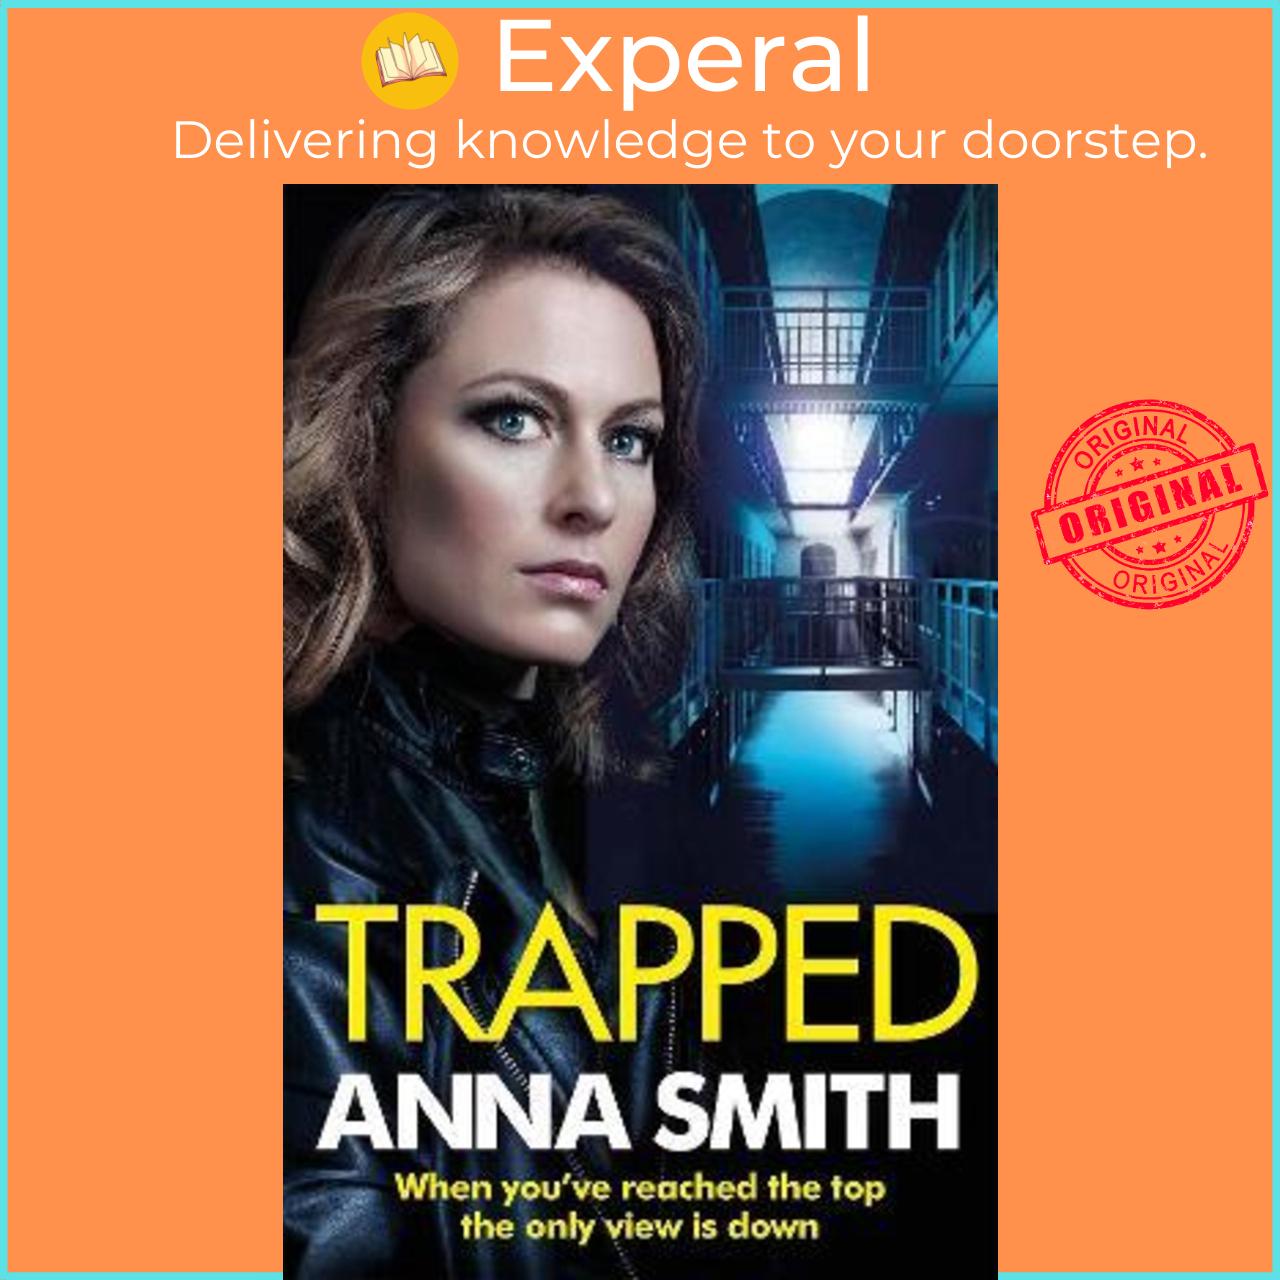 Sách - Trapped : The grittiest thriller you'll read this year by Anna Smith (UK edition, paperback)